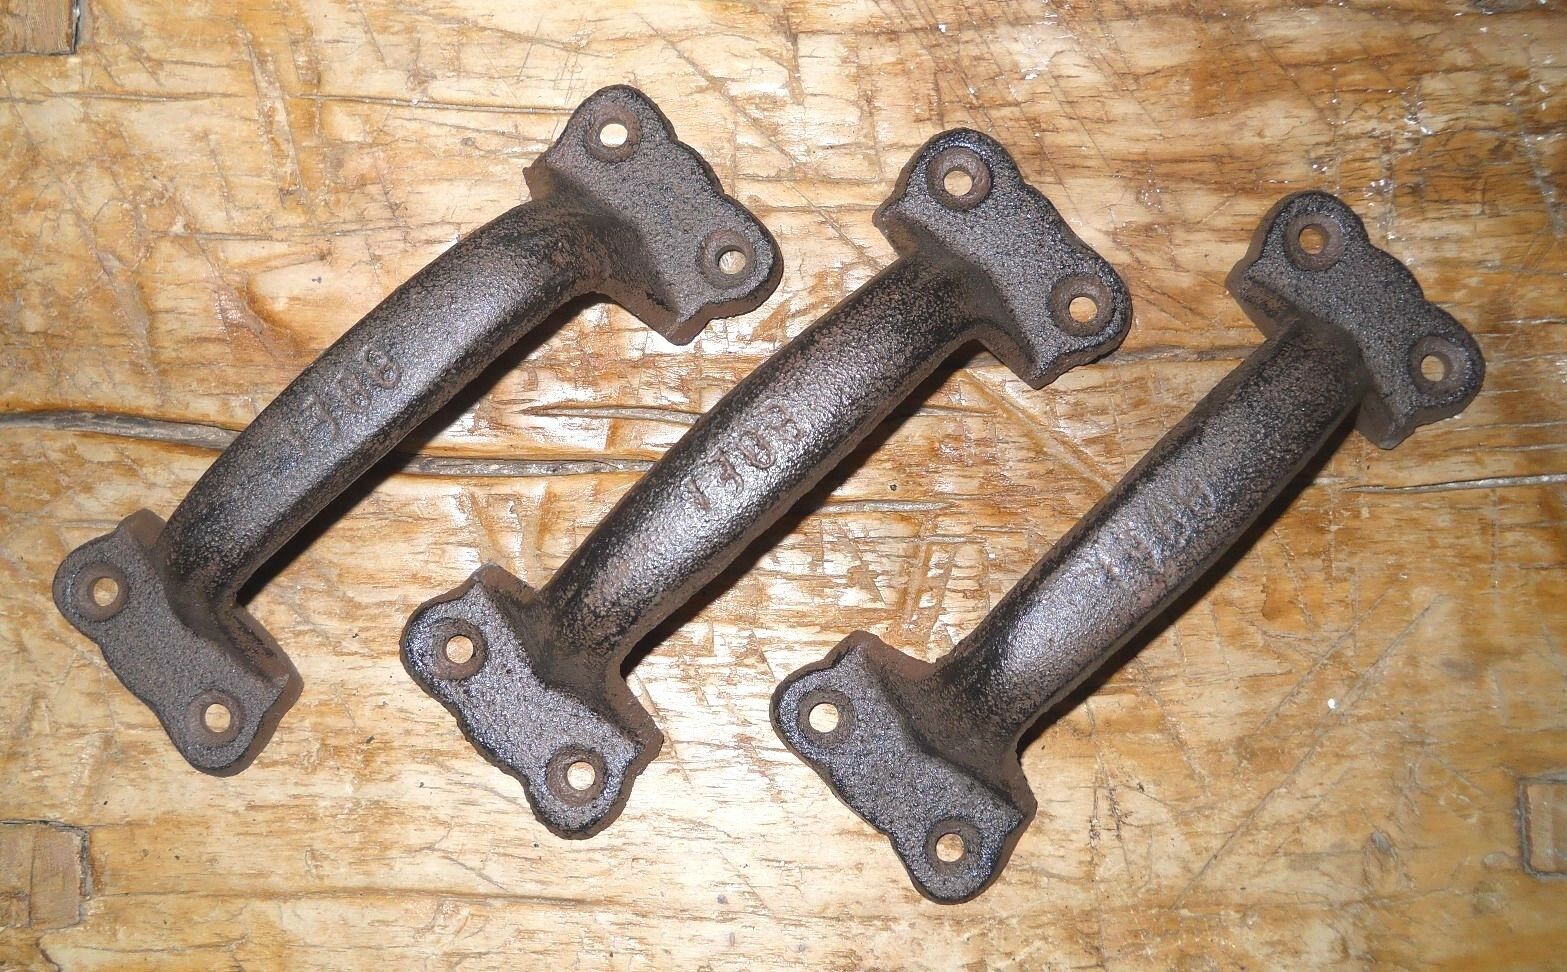 12 Cast Iron Antique Style Rustic Barn Handle, Gate Pull, Shed / Door Handles